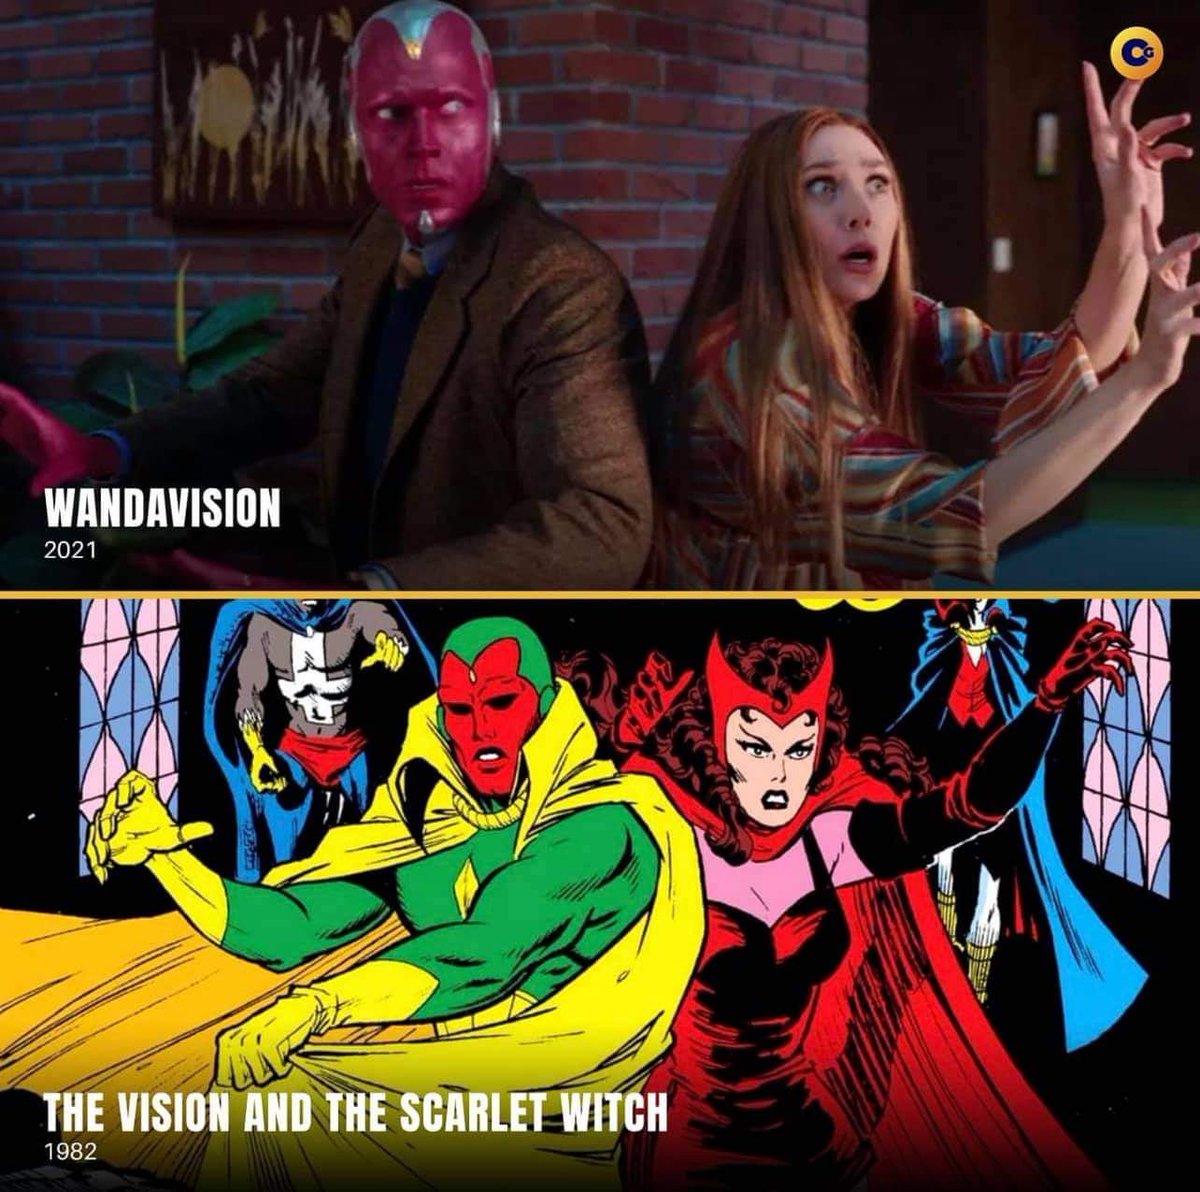  #WandaVision  . We're at the midpoint of the series, so here's a few thoughts on where we are. 15 tweets about WandaVision, a comicbook adaptation masquerading as a TV spinoff about side characters about a TV spinoff about side characters...1/15